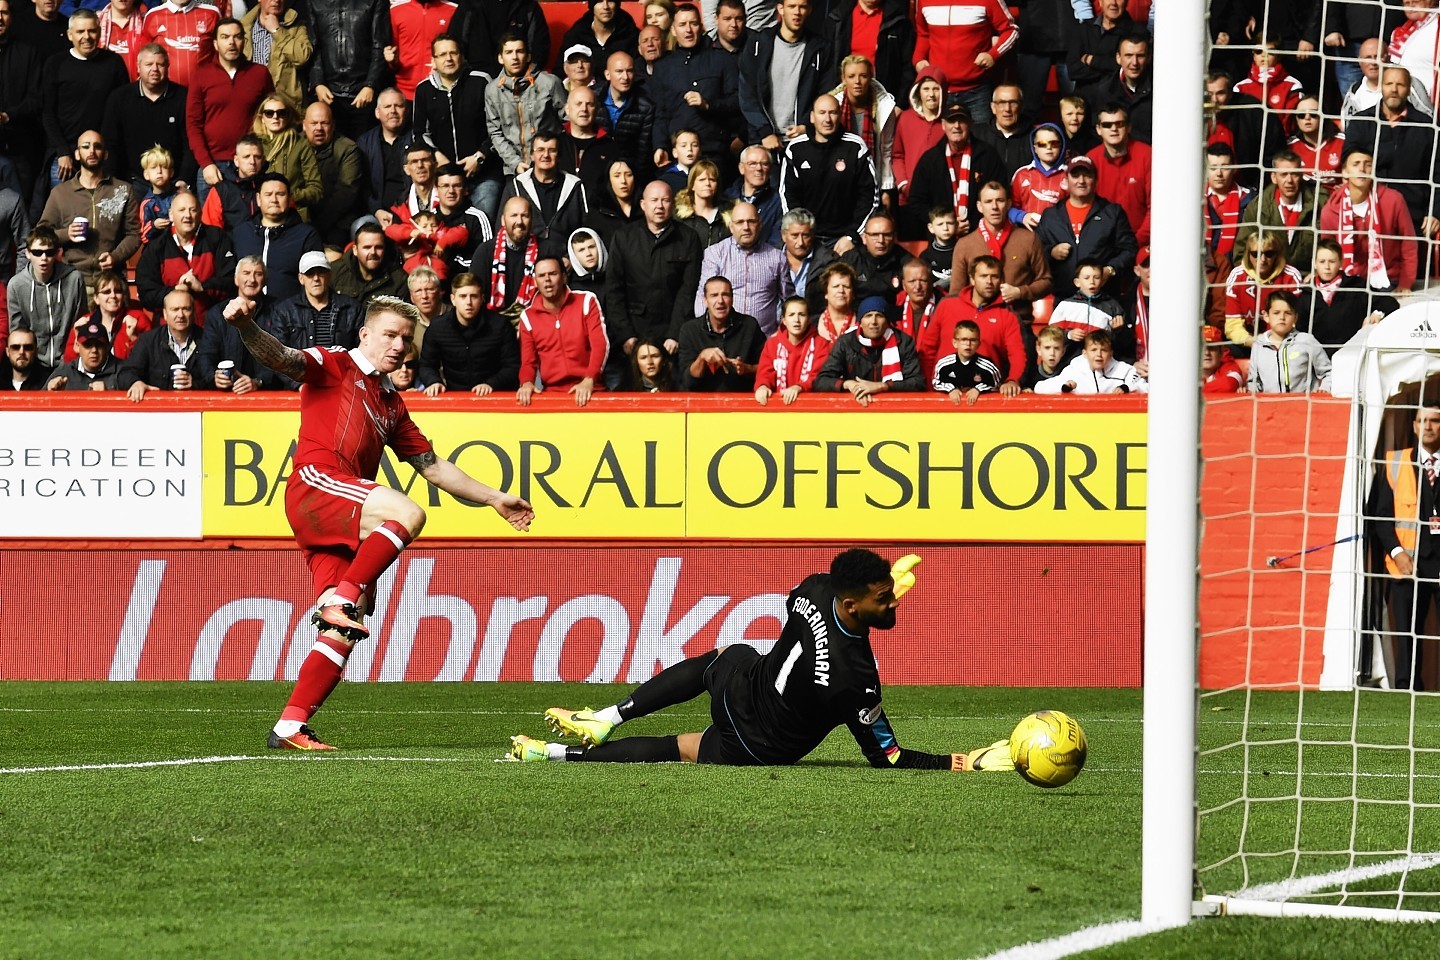 Jonny Hayes netted the opening goal for Aberdeen.